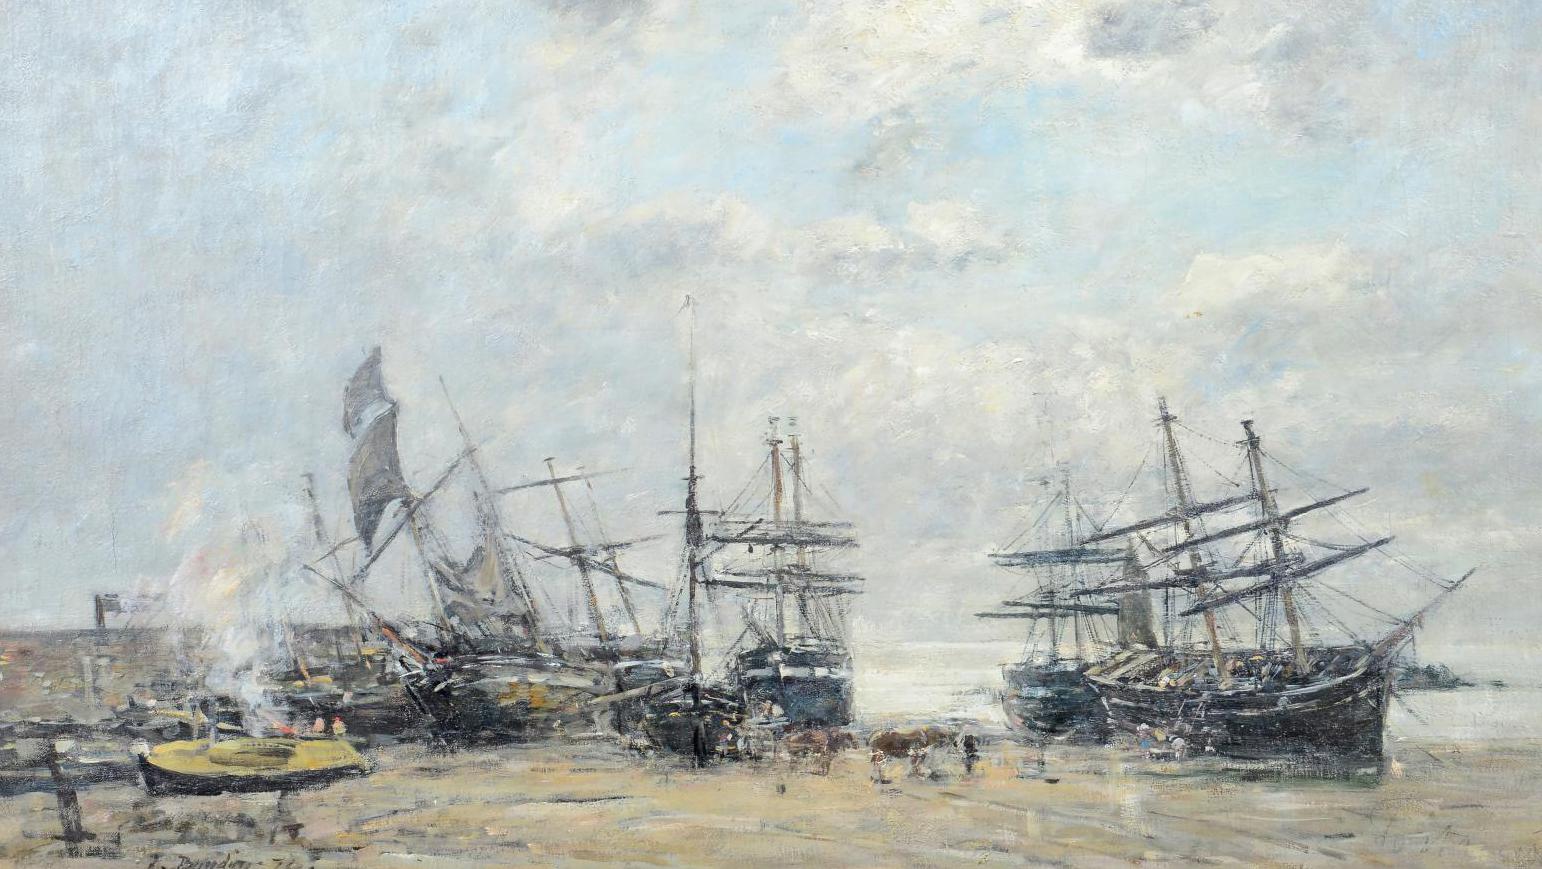 Eugène Boudin (1824-1898), Portrieux, marée basse (Portrieux, Low Tide), 1875, oil... Eugène Boudin Returns From Fishing in Brittany 